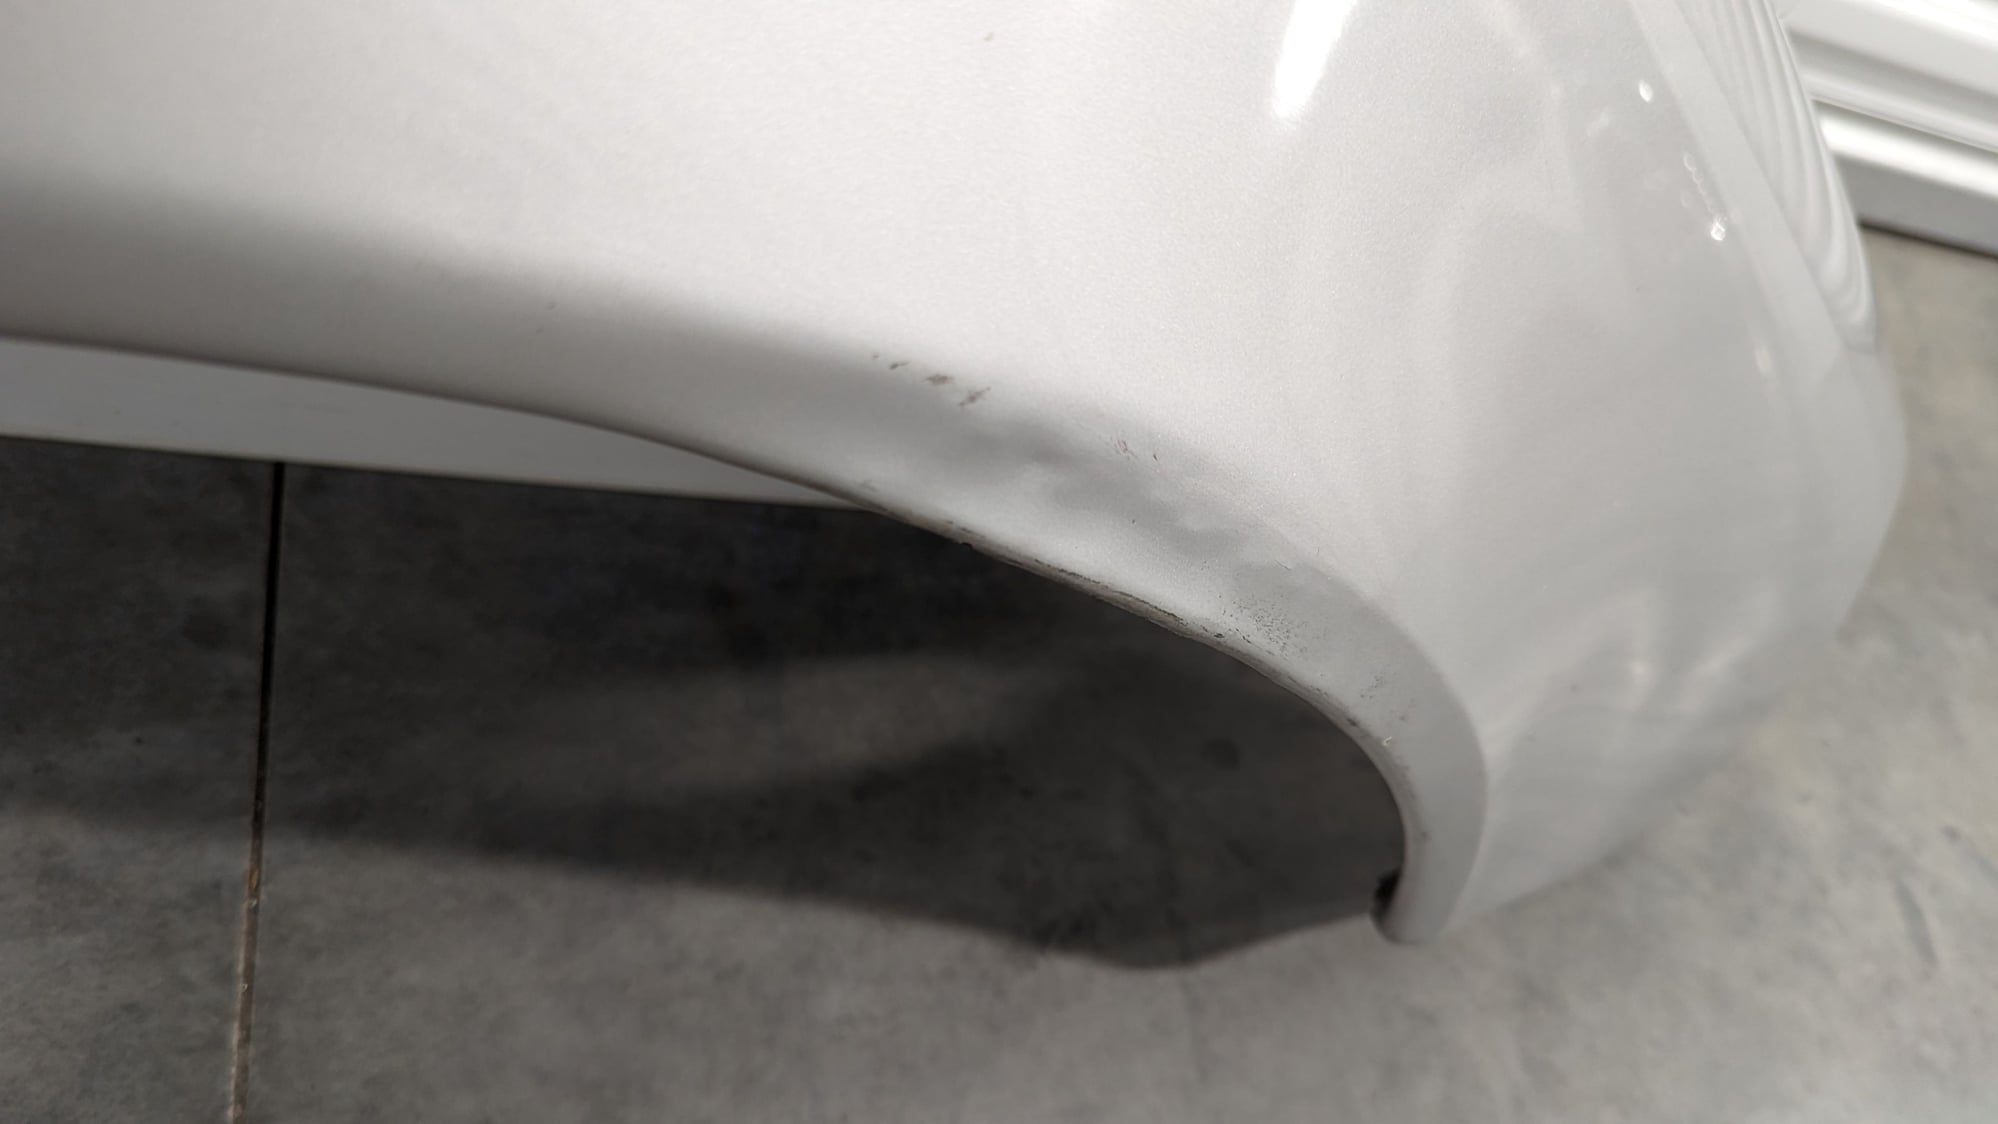 Exterior Body Parts - 2000-2006 Mercedes W220 S430 S500 S55 Amg Side Fender - Used - 2003 to 2006 Mercedes-Benz S55 AMG - Cerritos, CA 90703, United States